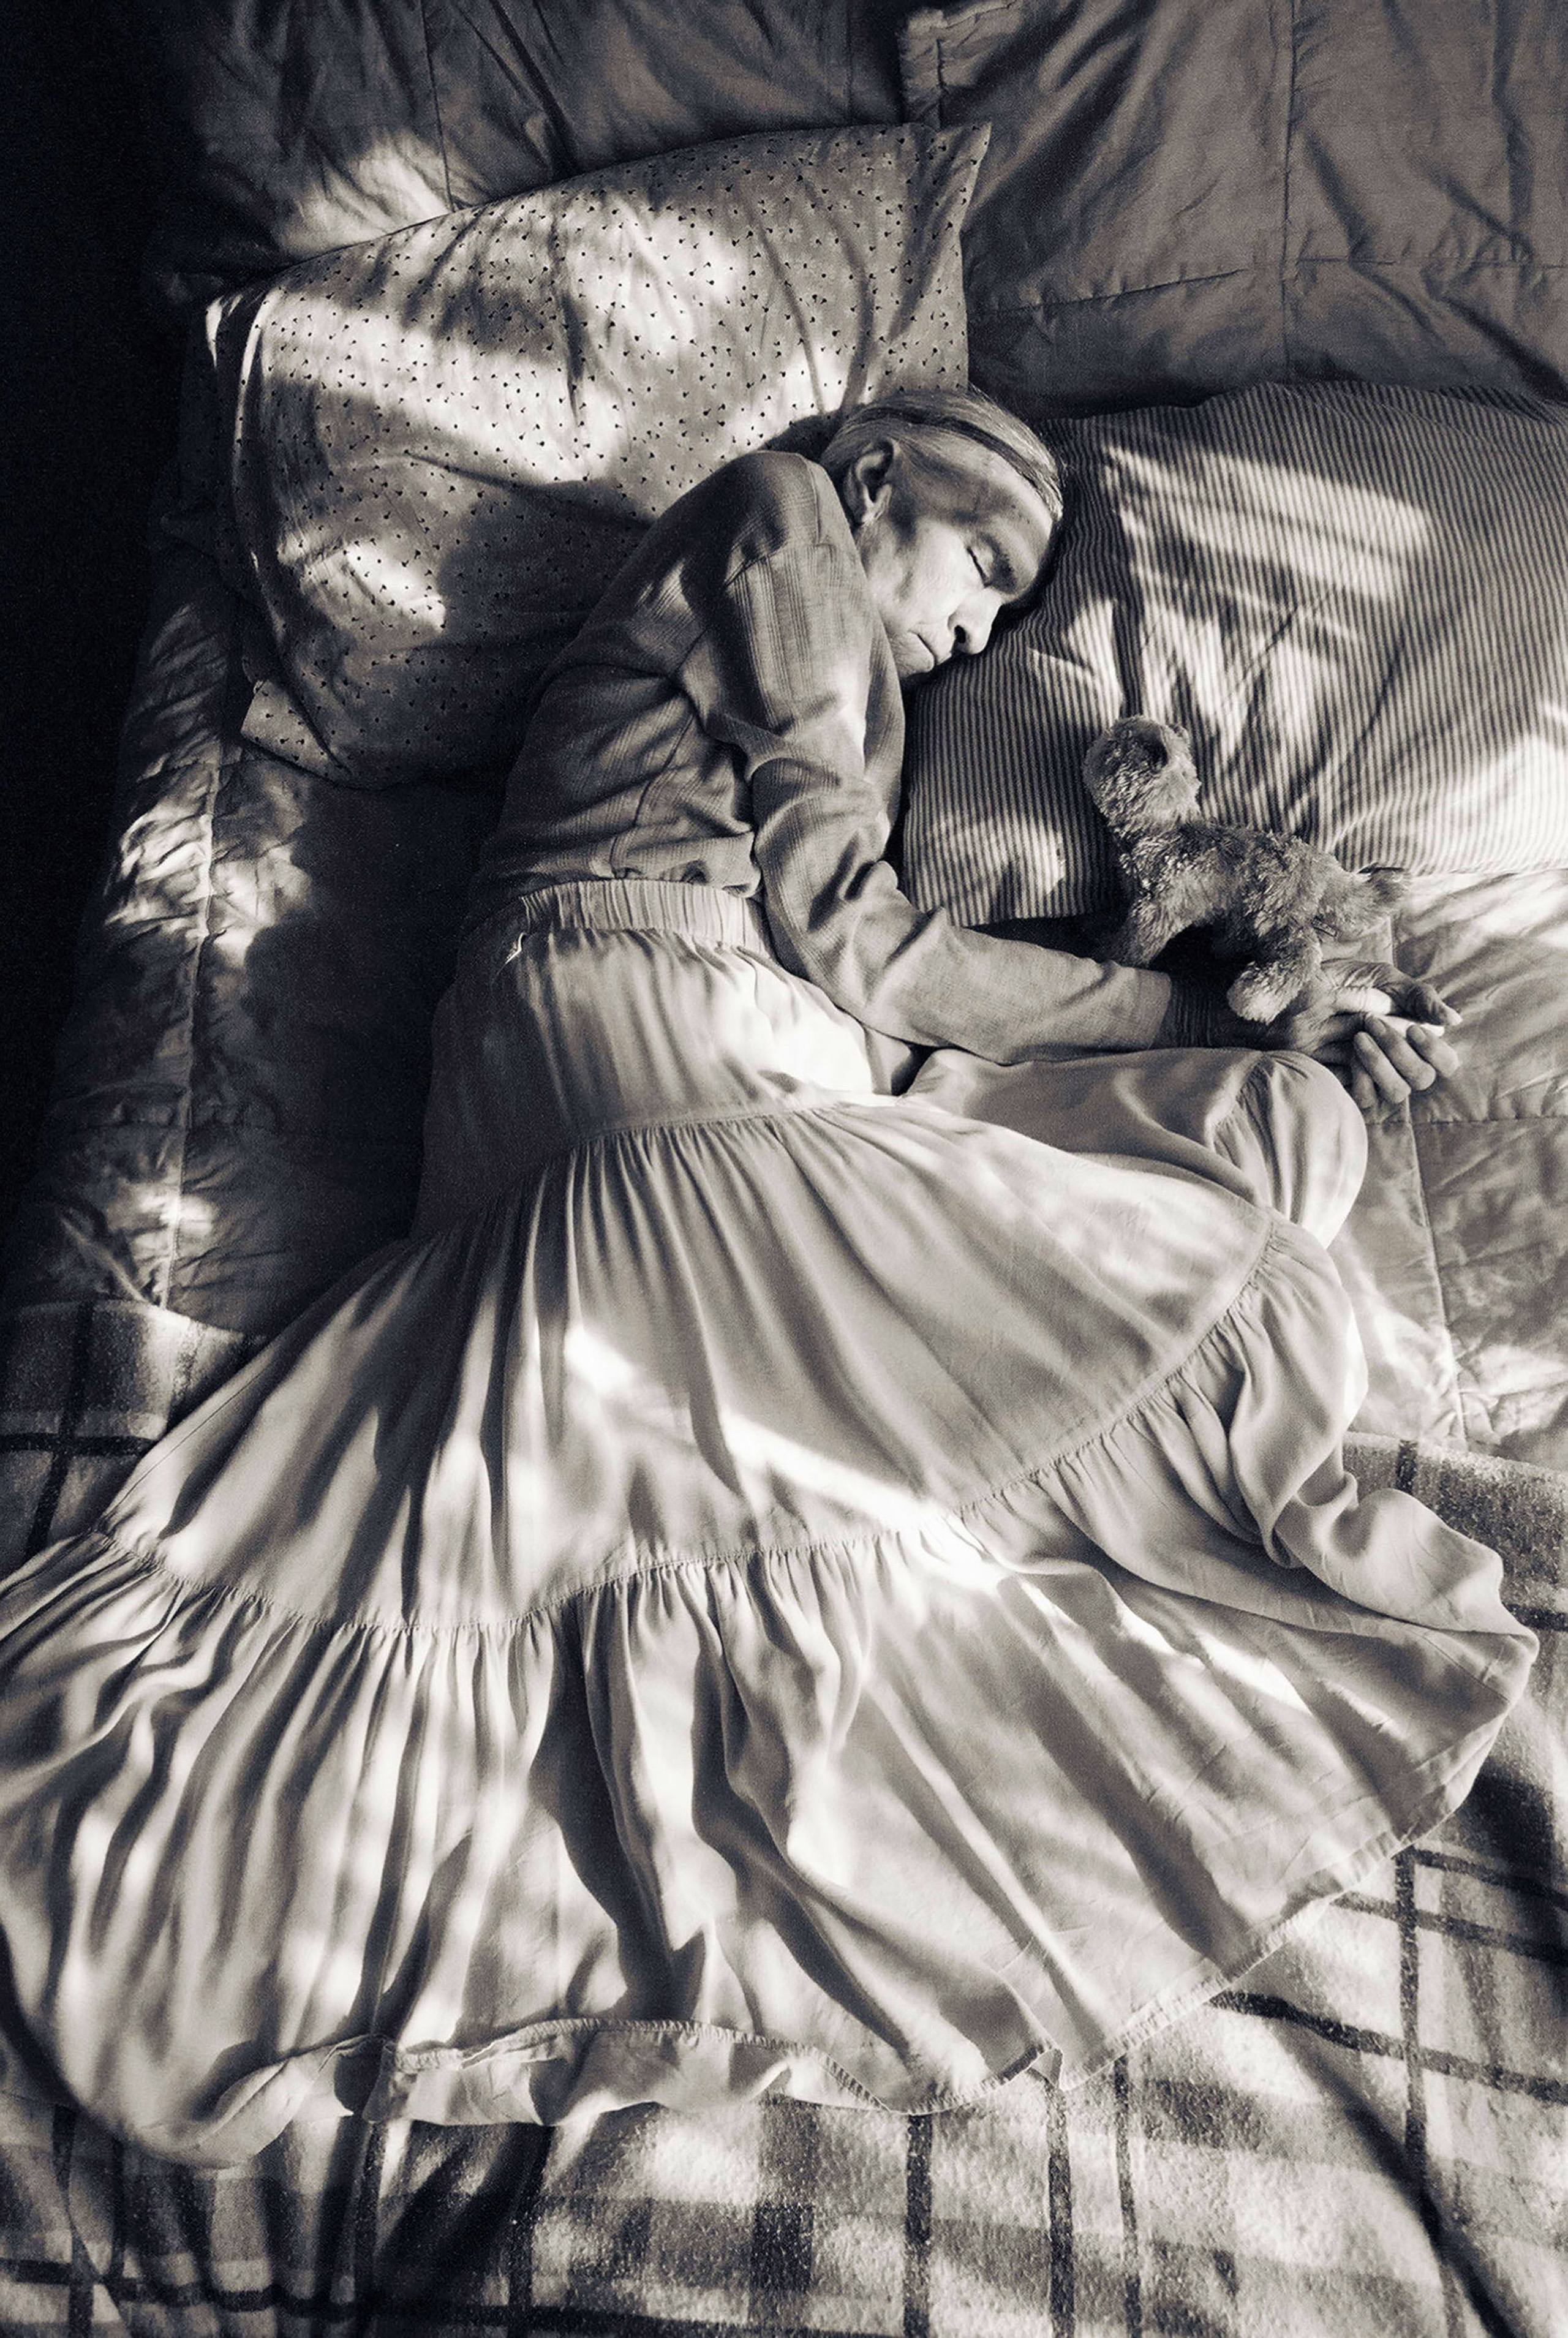 Madje Steber, 87, takes an afternoon nap in her bed at Midtown Manor, an assisted living home in Hollywood, Fl. From the series Madje has dementia. (MAGGIE STEBER)